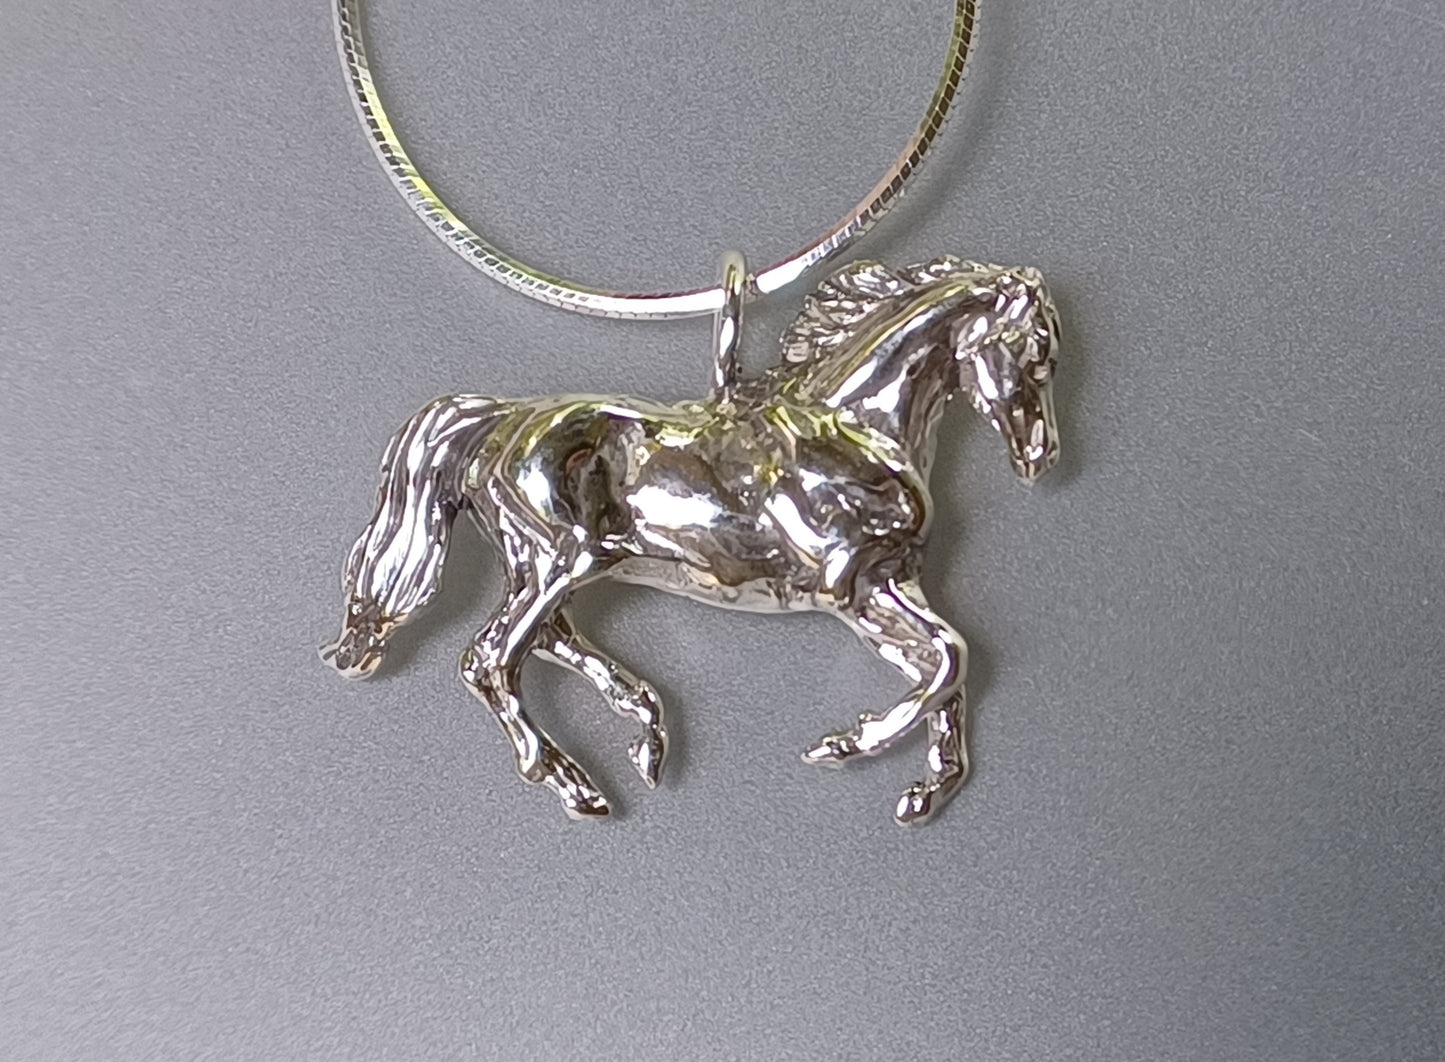 Galloping Horse Jewelry Necklace Pendant and chain